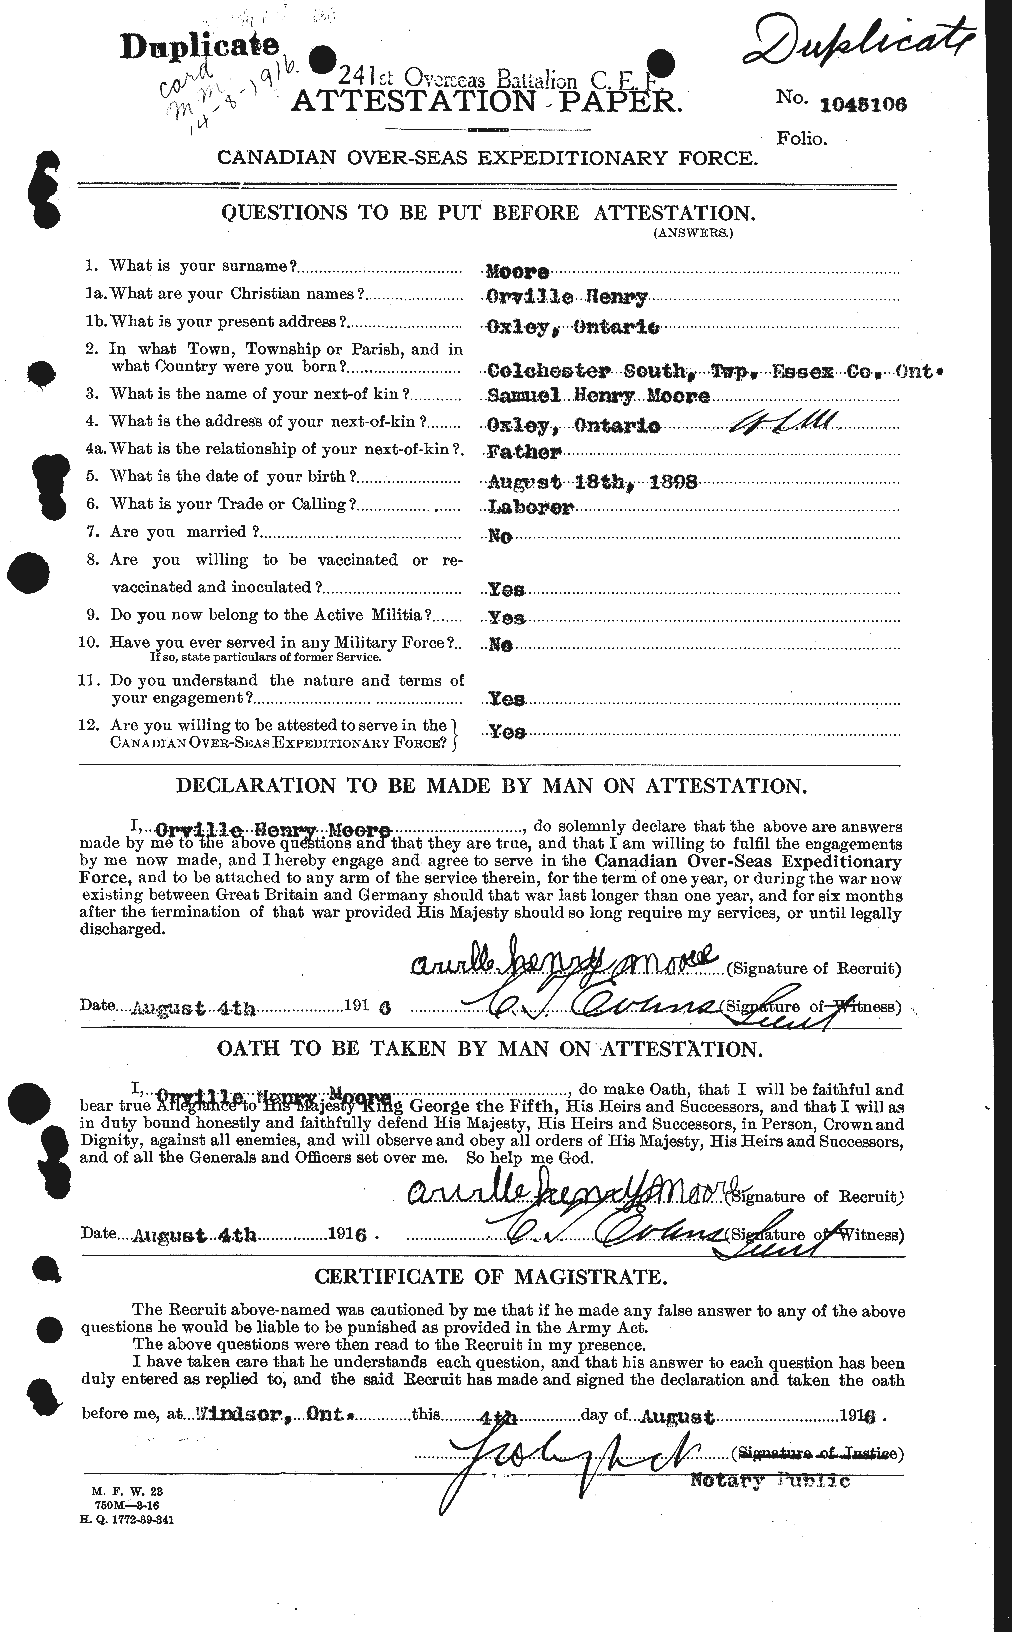 Personnel Records of the First World War - CEF 503470a